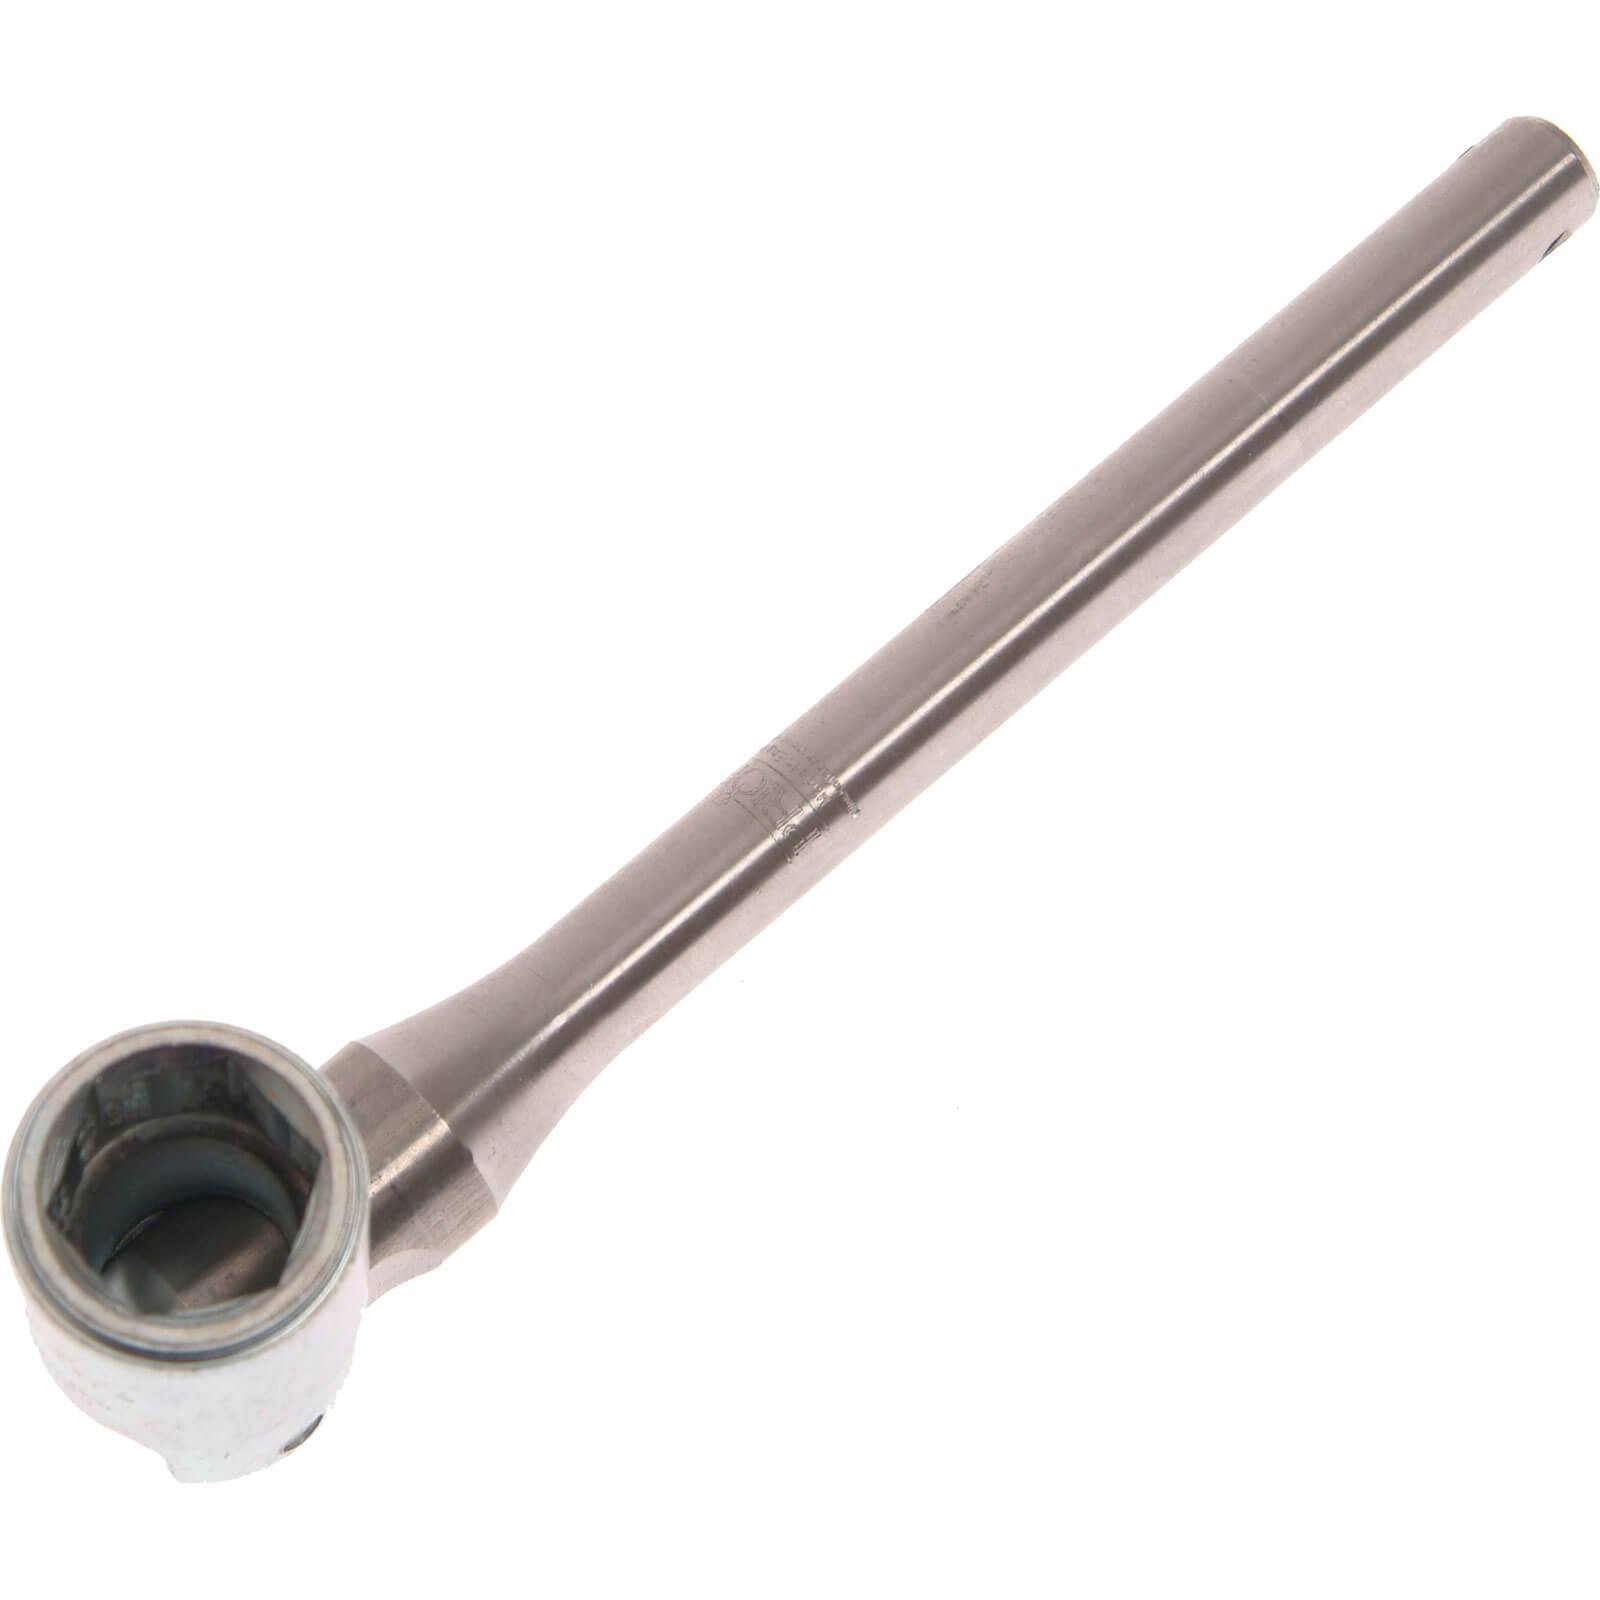 Image of Priory 381 Stainless Steel Scaffold Spanner Whitworth 7/16" Round Steel Socket